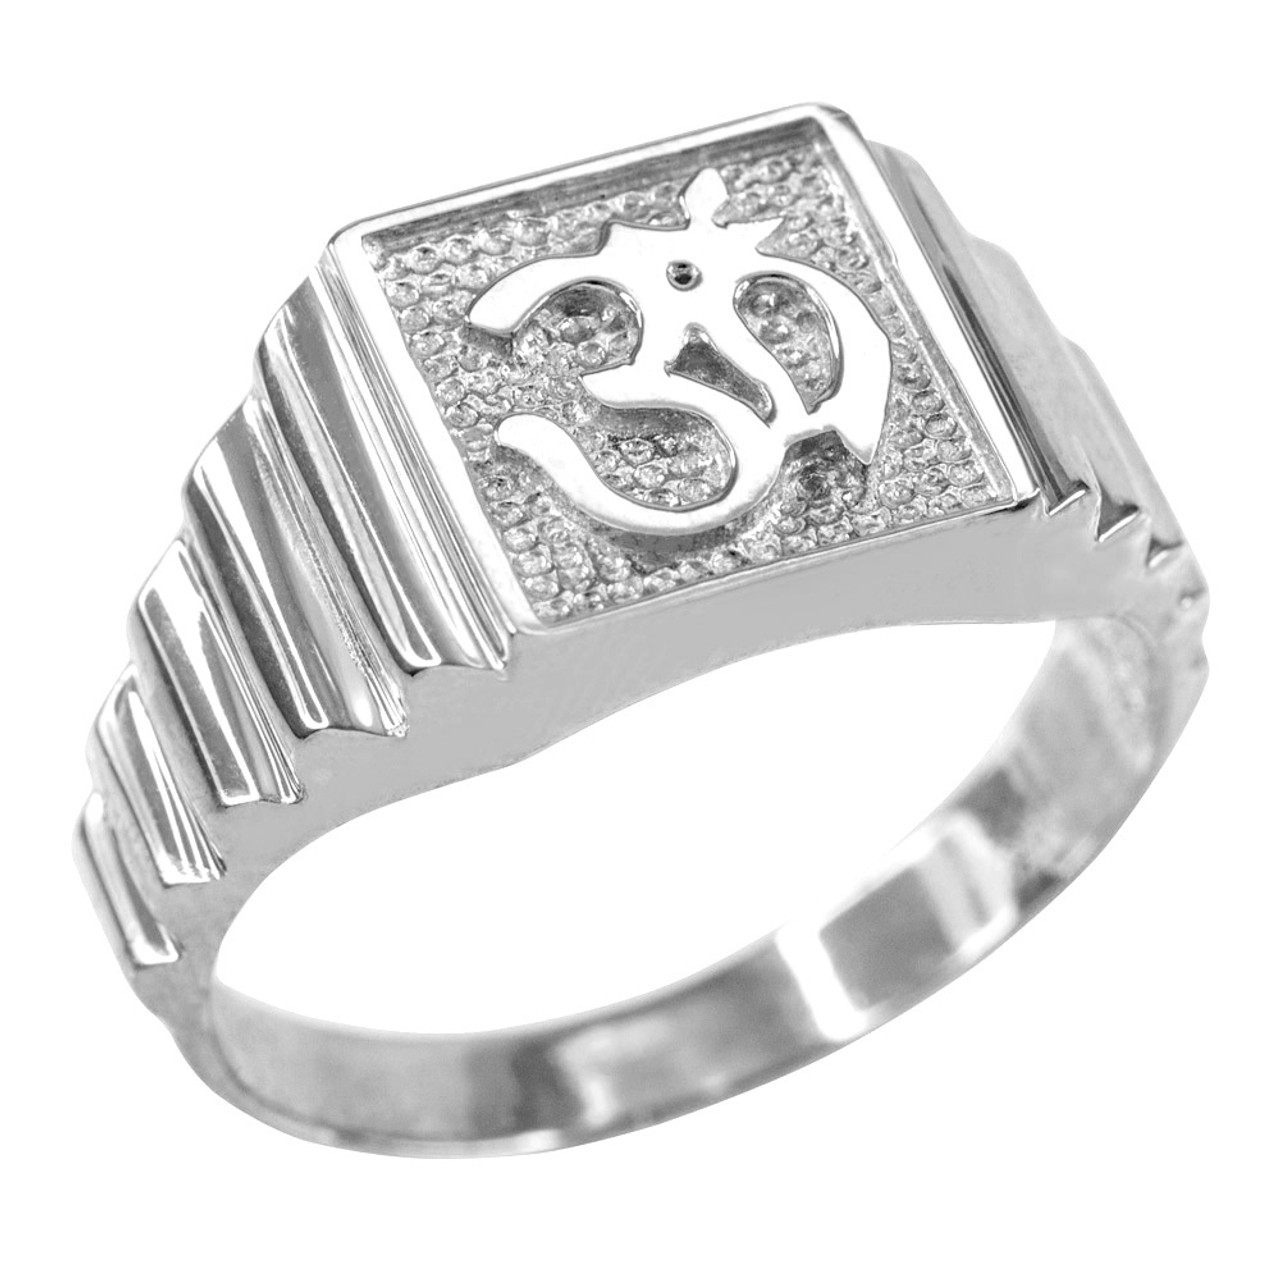 Buy quality Silver 925 om in classic design ring sr925-140 in Ahmedabad